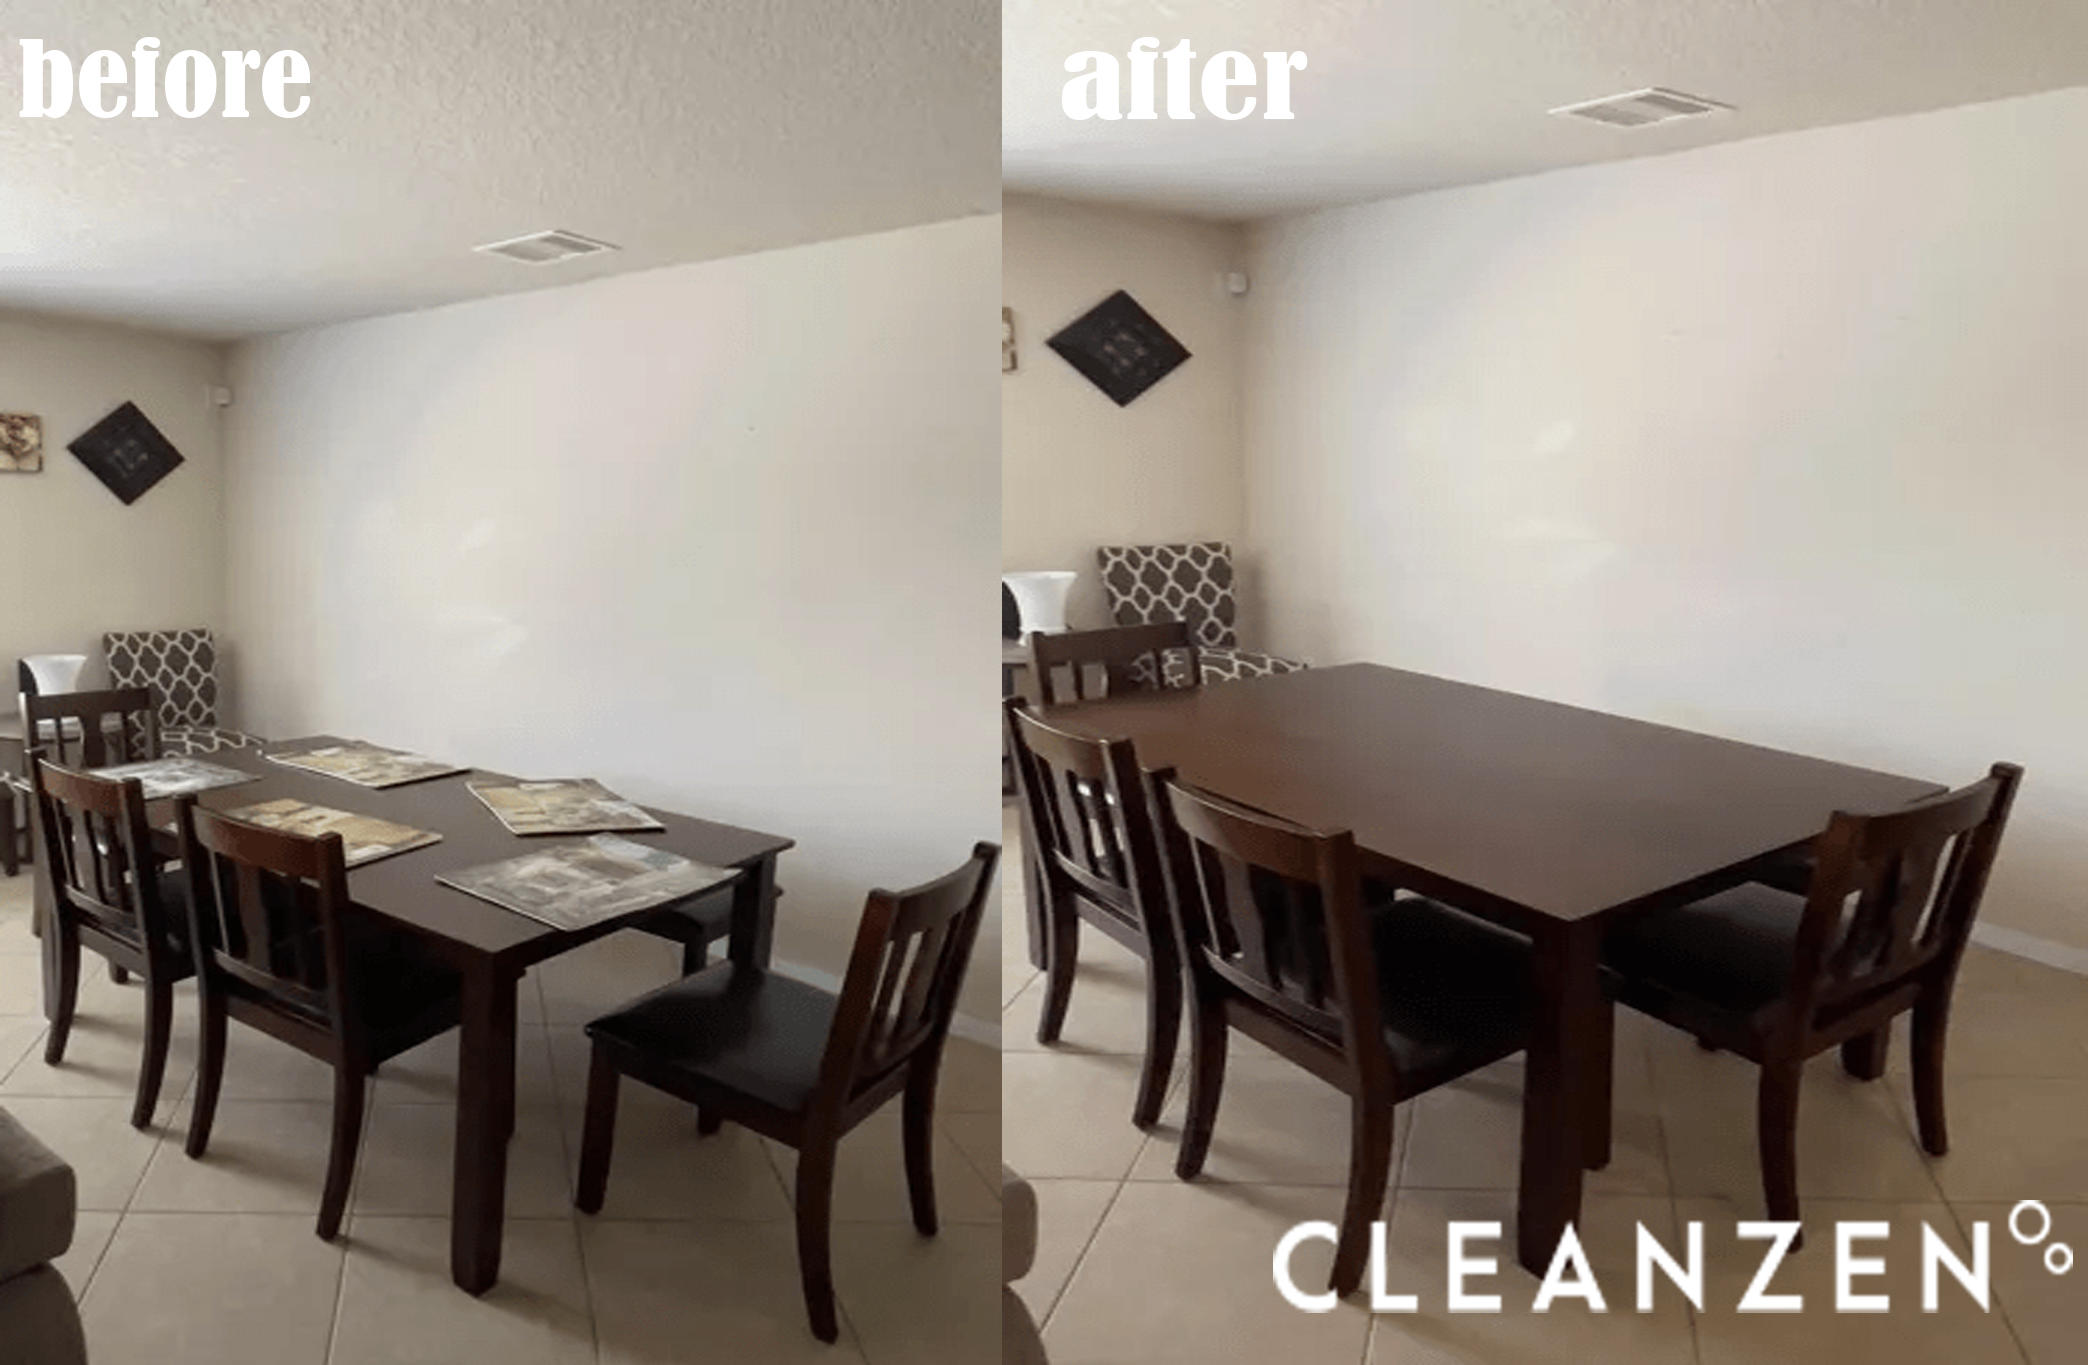 House Cleaning Denver CO